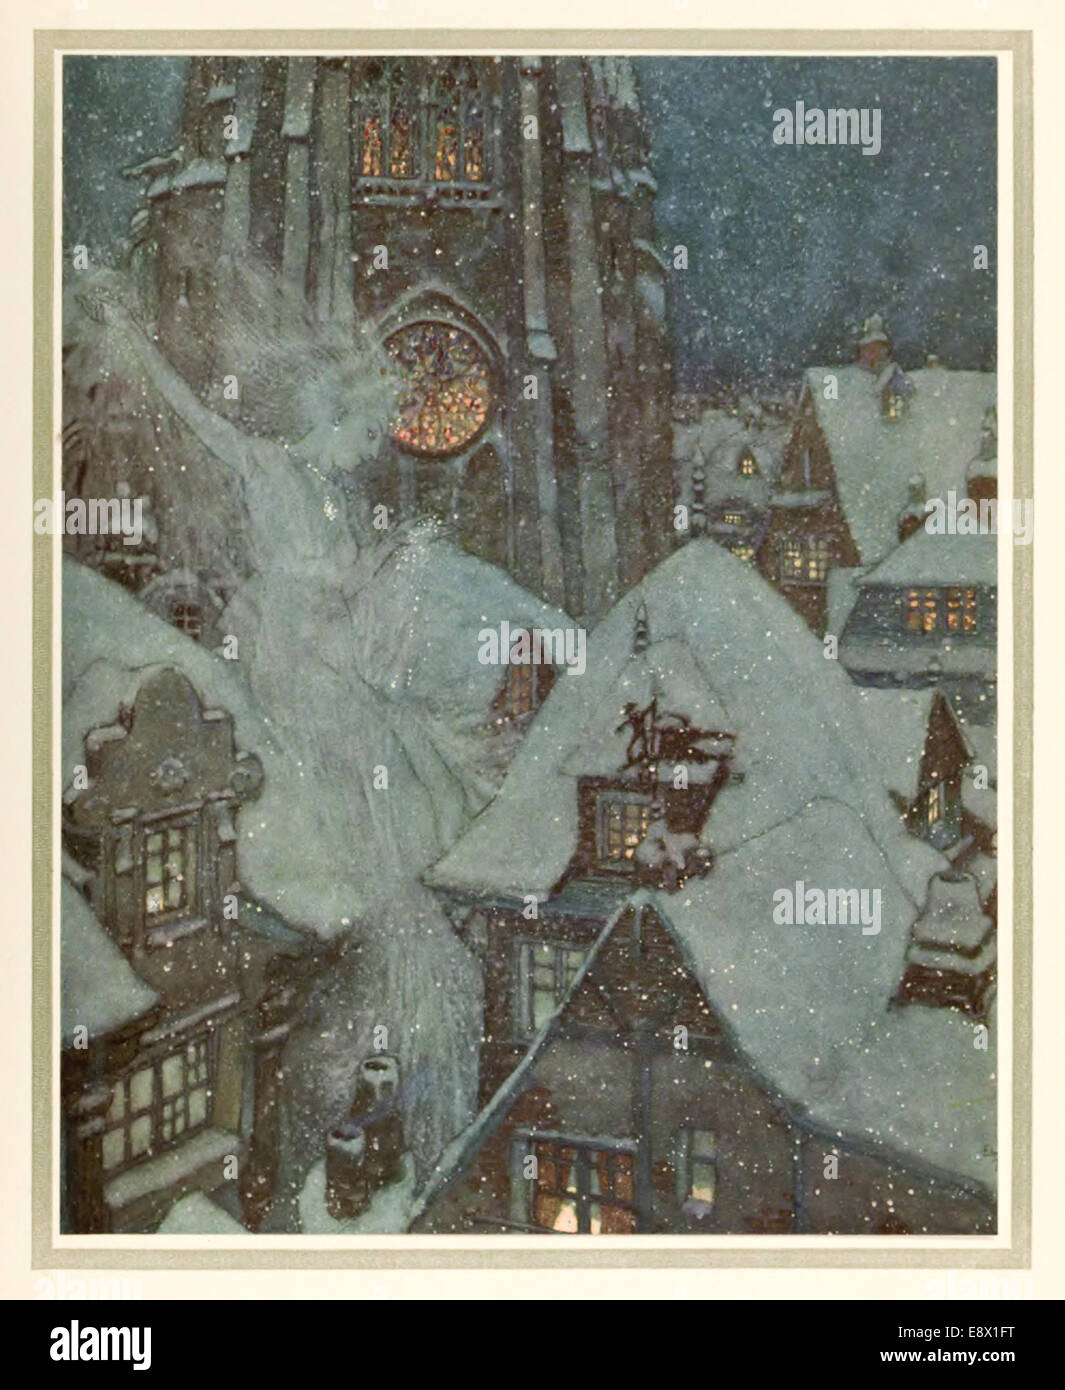 Snow Queen - Edmund Dulac (1882-1953) illustration from ‘Stories from Hans Andersen’. See description for more information. Stock Photo